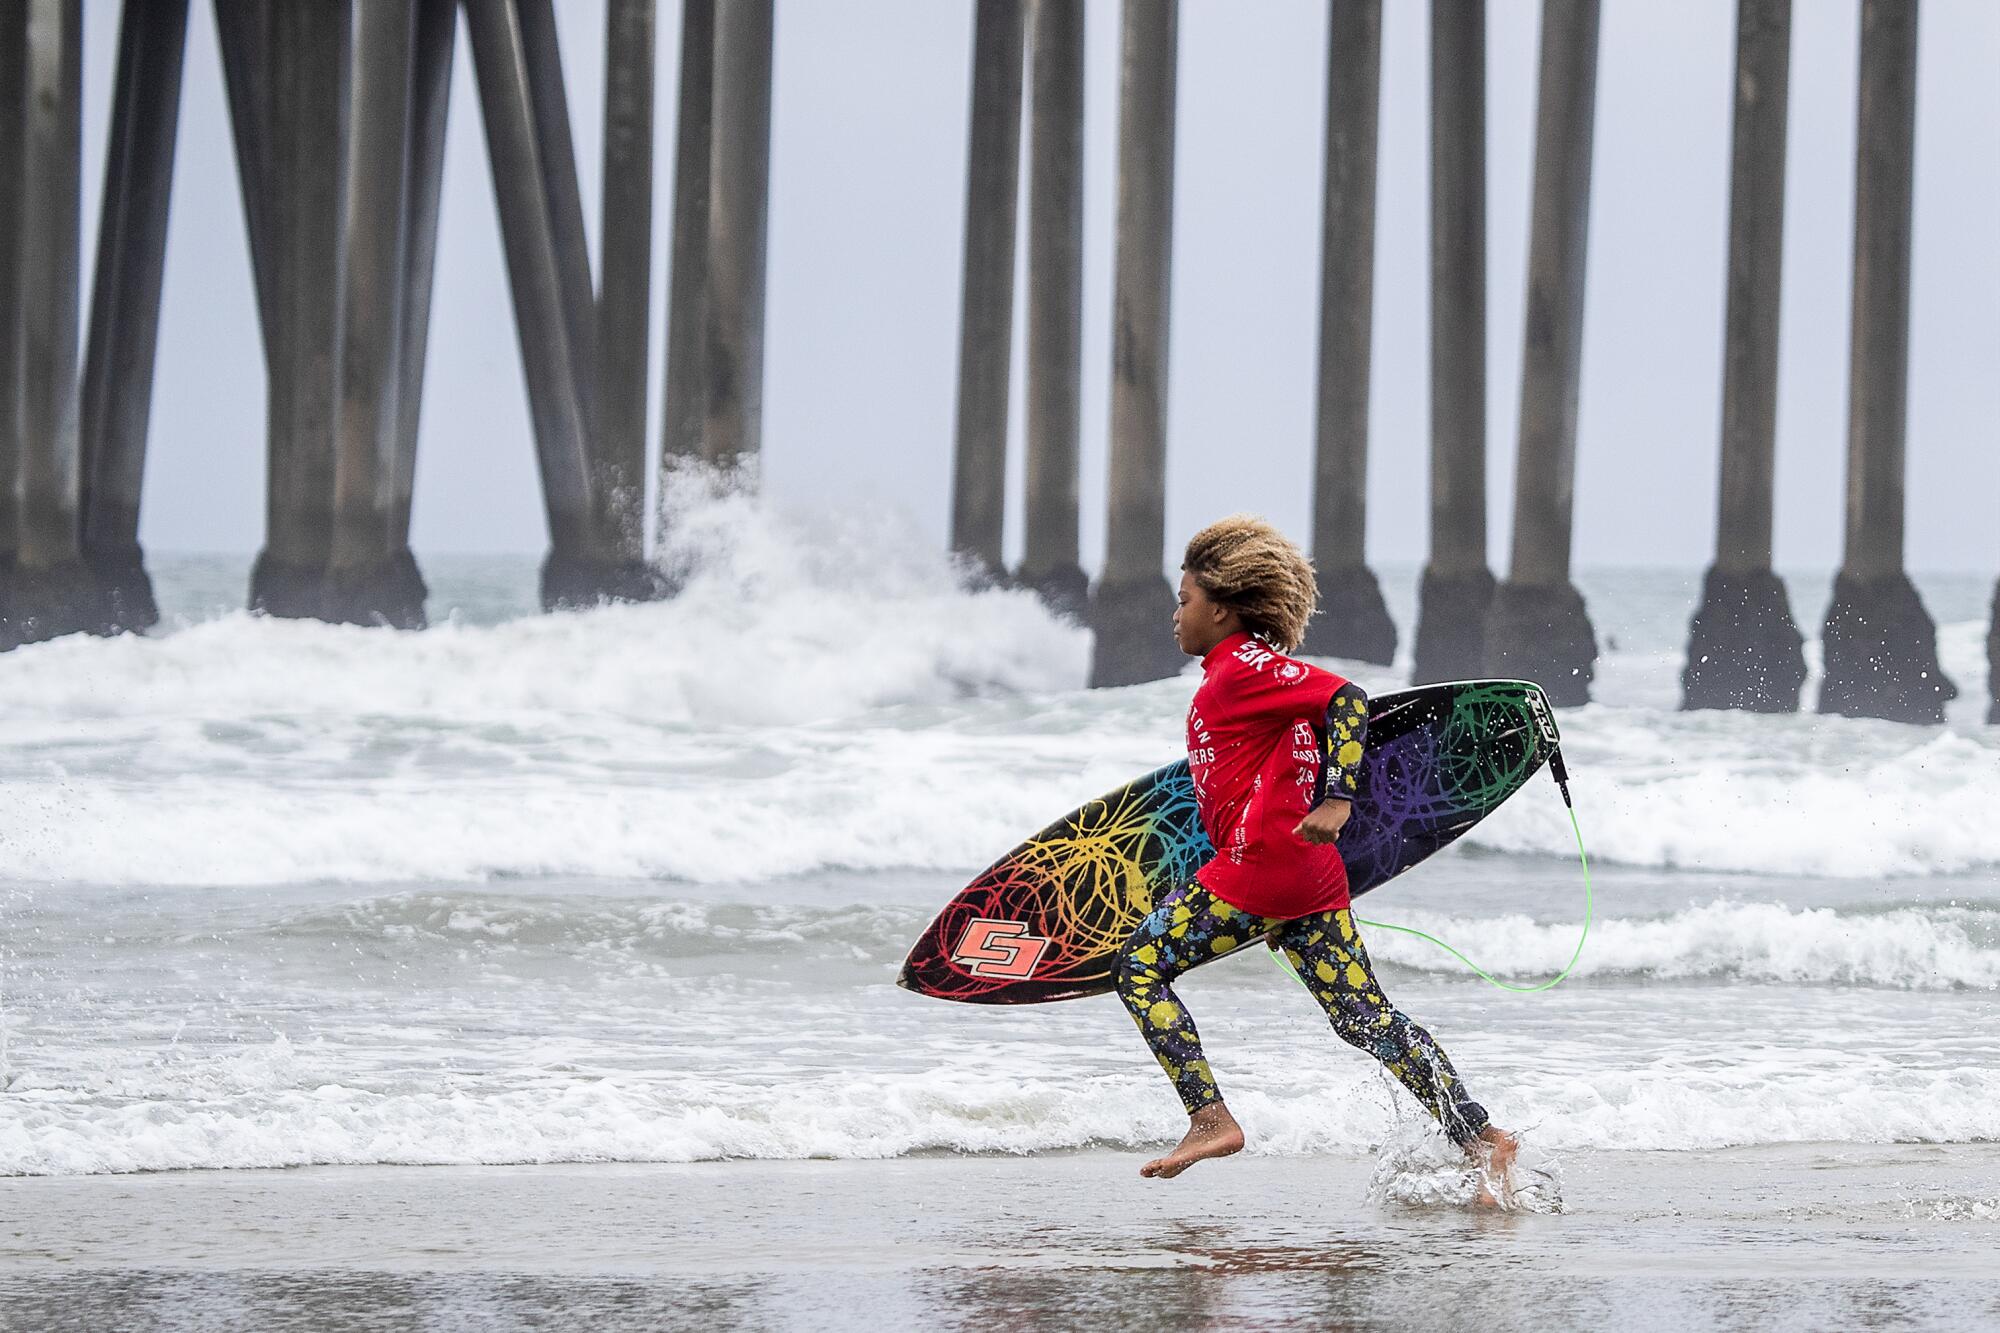 Matthew Oliveira, 10, runs out to compete in the junior surf competition during "A Great Day in the Stoke."